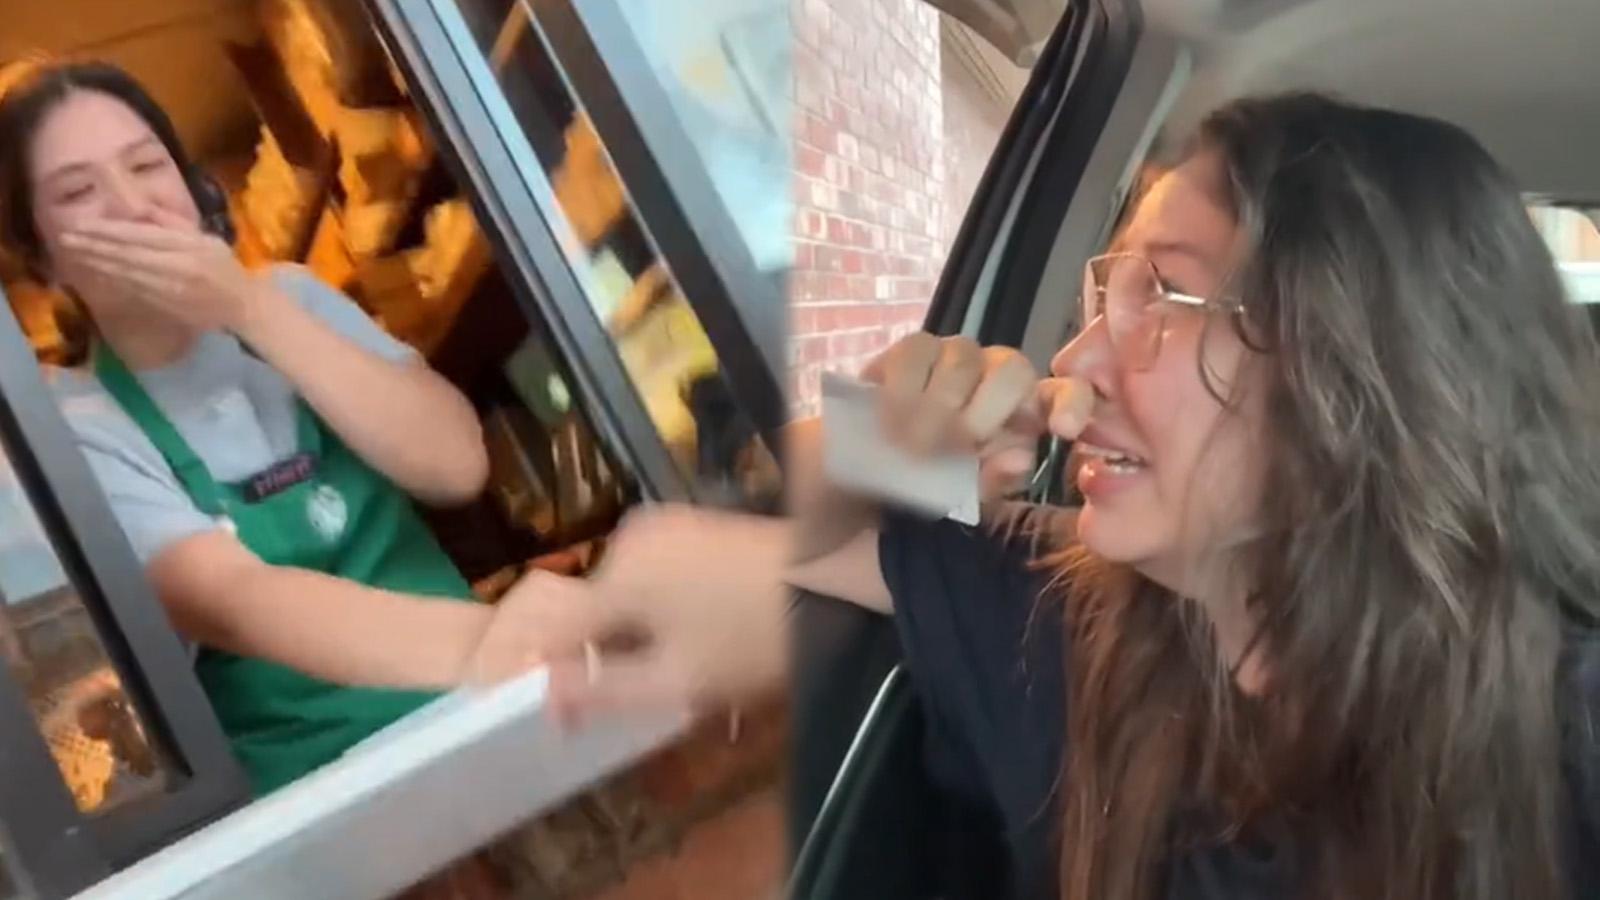 Starbucks customer called out for oversharing to unsuspecting drive-thru worker